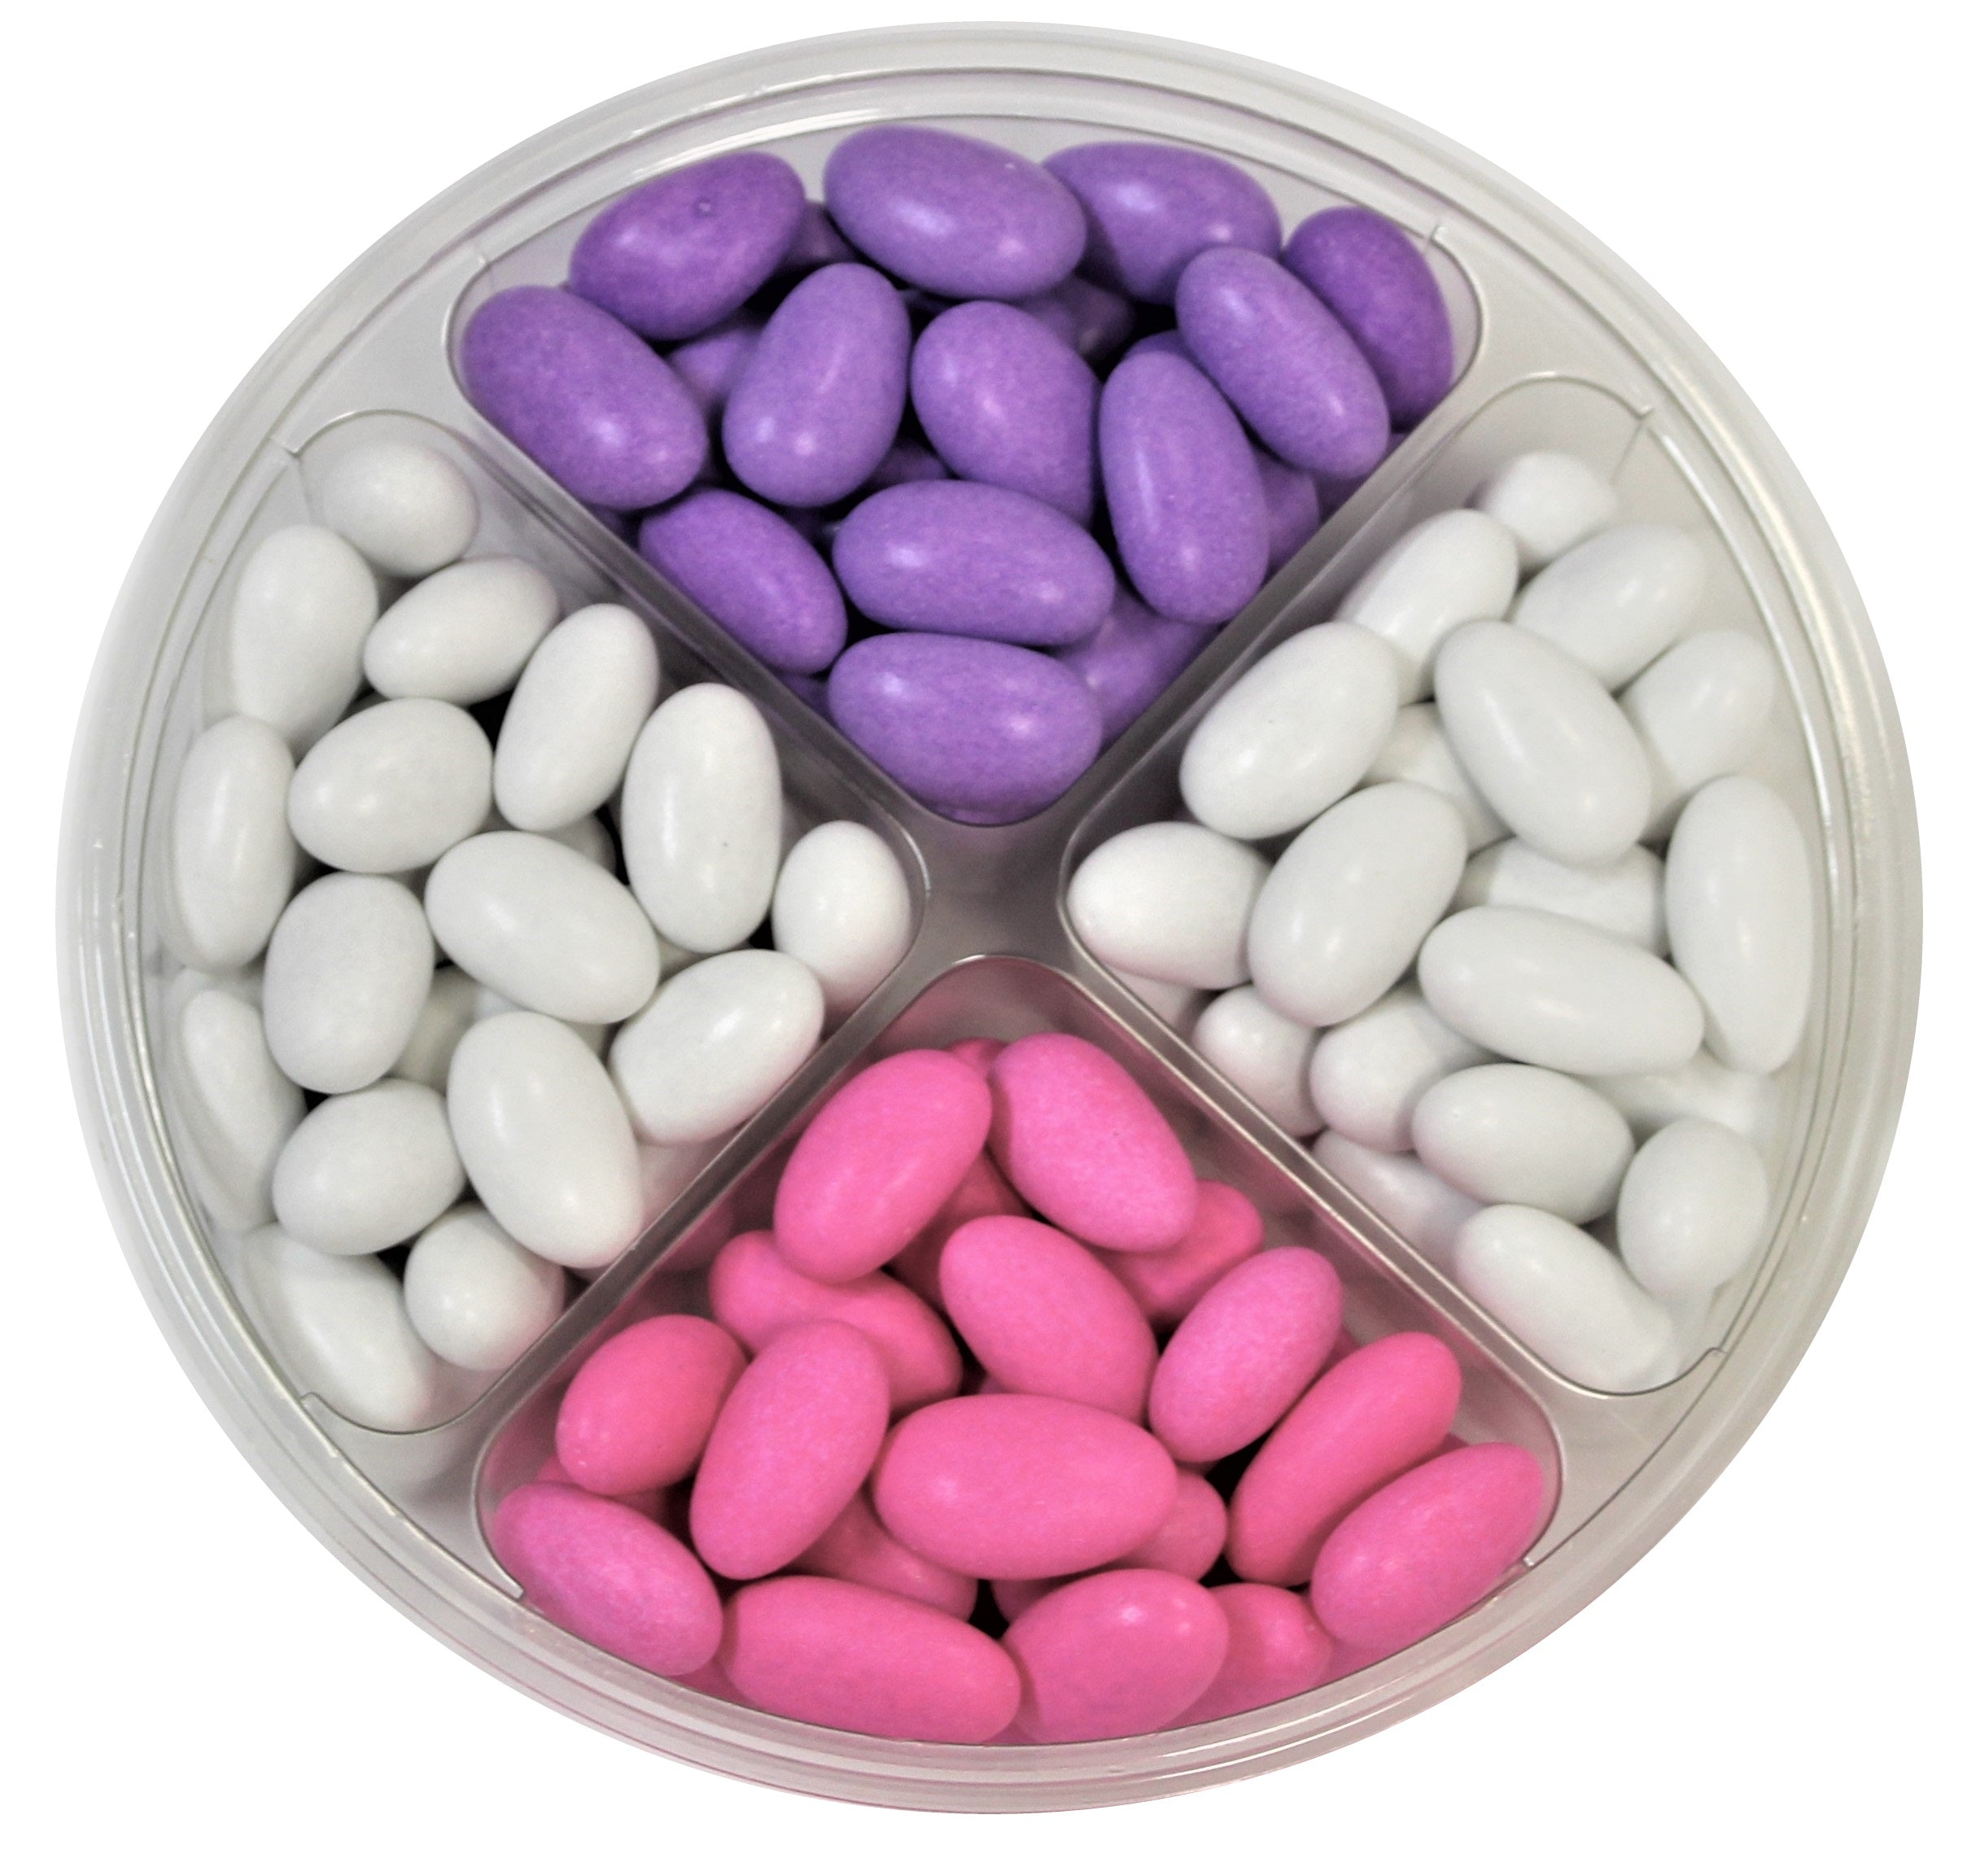 It's A Girl! Jordan Almond Gift Tray (Pastel Pink, White and Lavender, 4 Section) - Its Delish